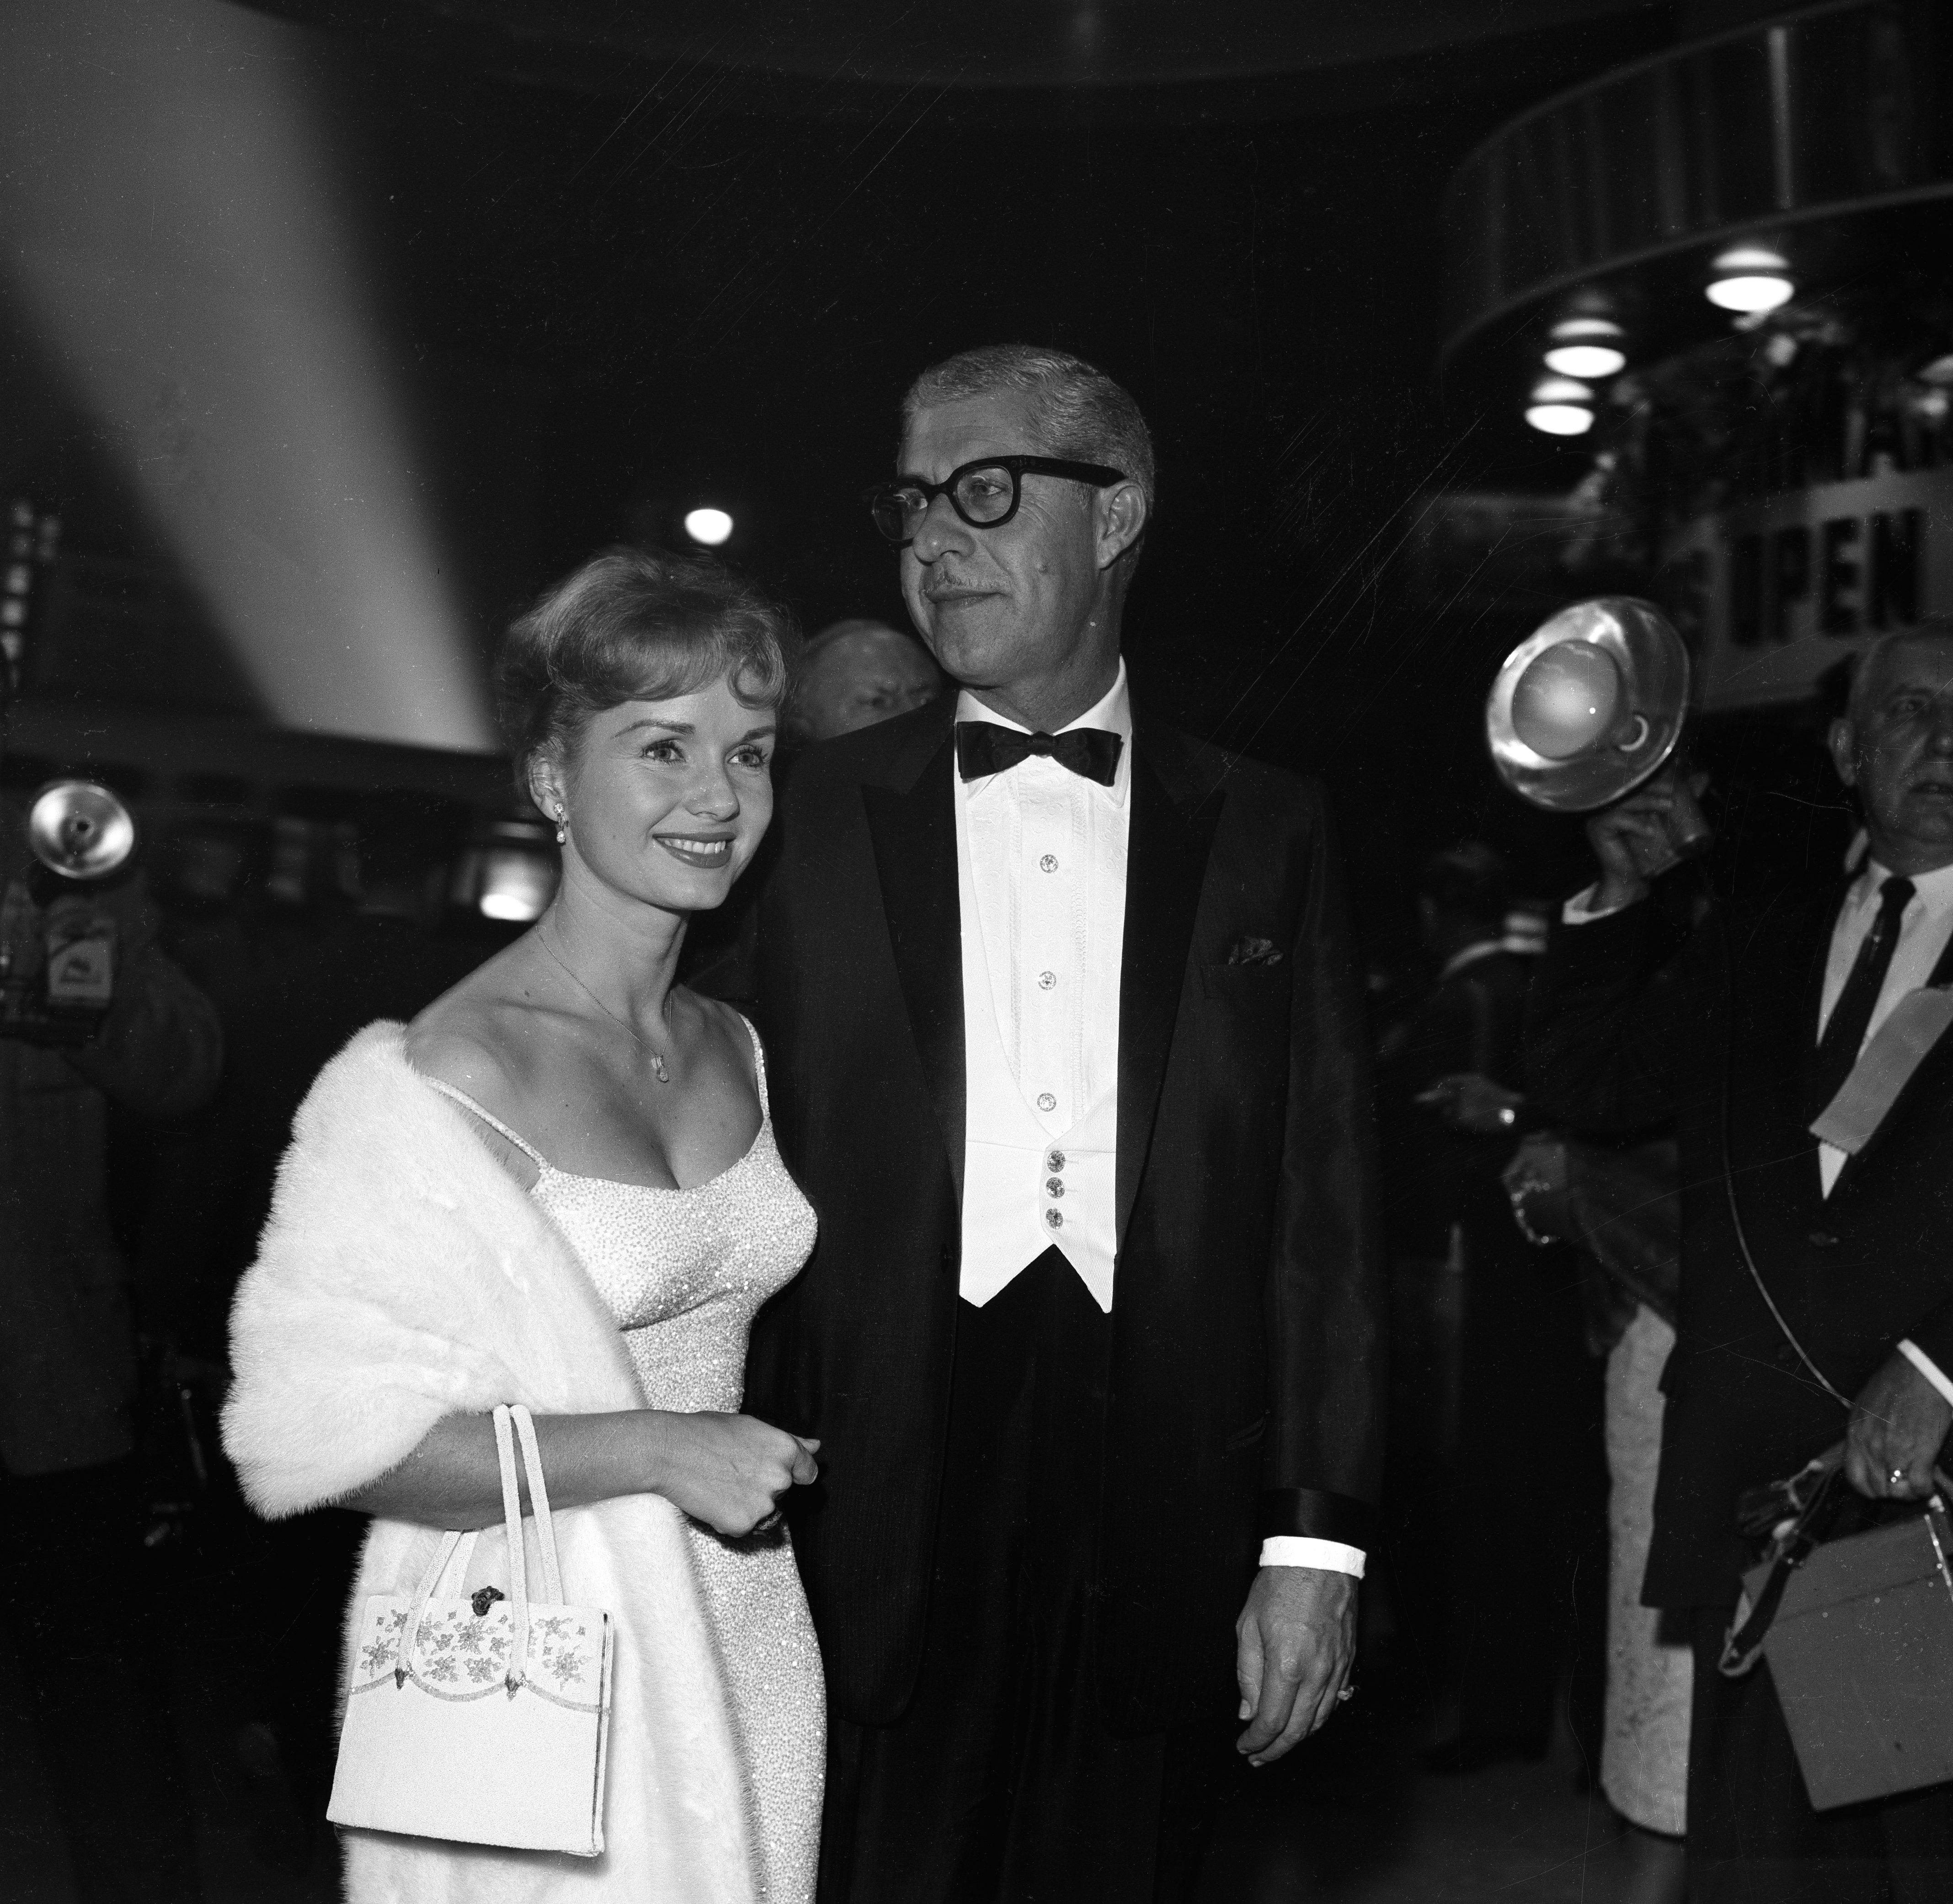 Debbie Reynolds and Harry Karl attend an event on January 1, 1959 in Los Angeles, California ┃Source: Getty Images